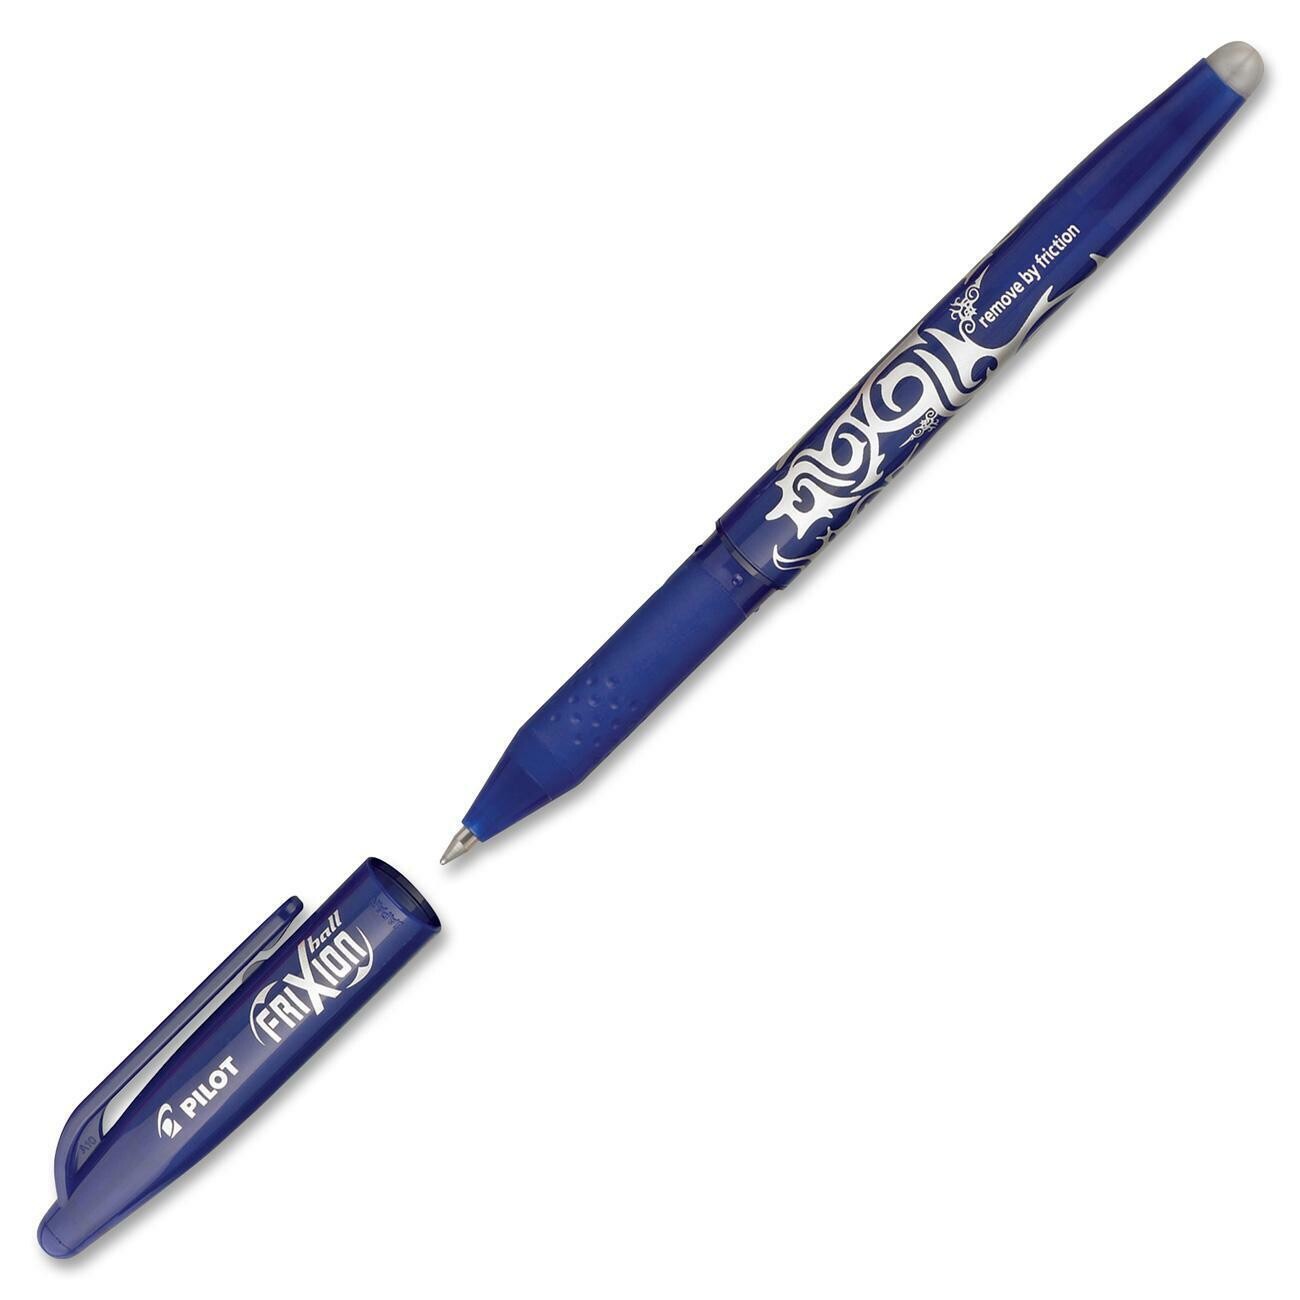 Pen, Erasable, Gel Rollerball, FriXion Blue, Box of 12, 0.7 Mm